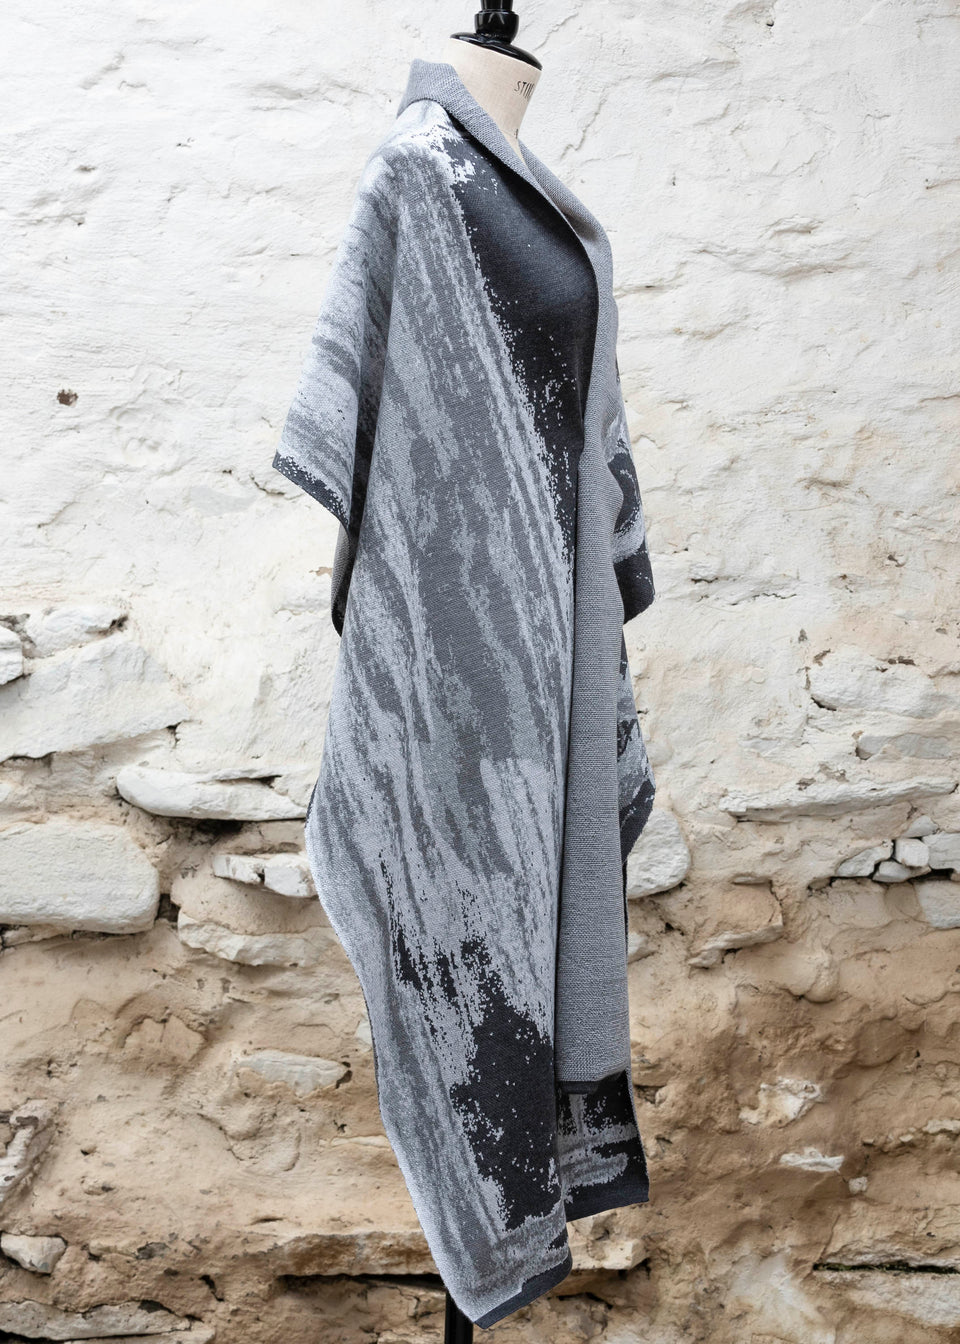 Finely knitted shawl in luxurious merino, made in Scotland. Shown on a vintage mannequin against a whitewashed wall. Abstract design in sea greys with curvilinear motifs. Draped to show whole shawl from theside